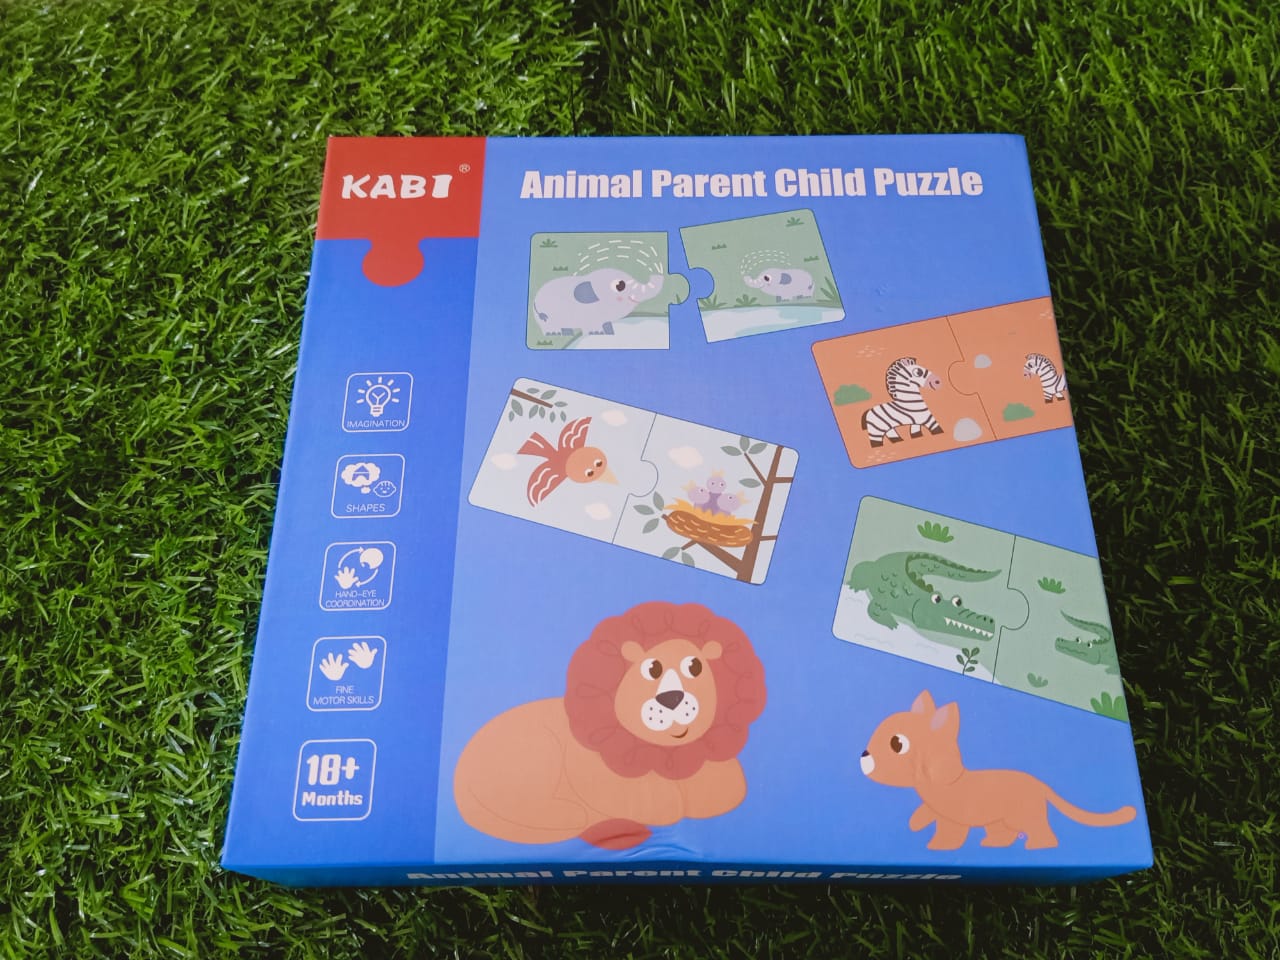 My First Learning Puzzle - Animal and Parent, Multi Color for Kids-SHTM1073